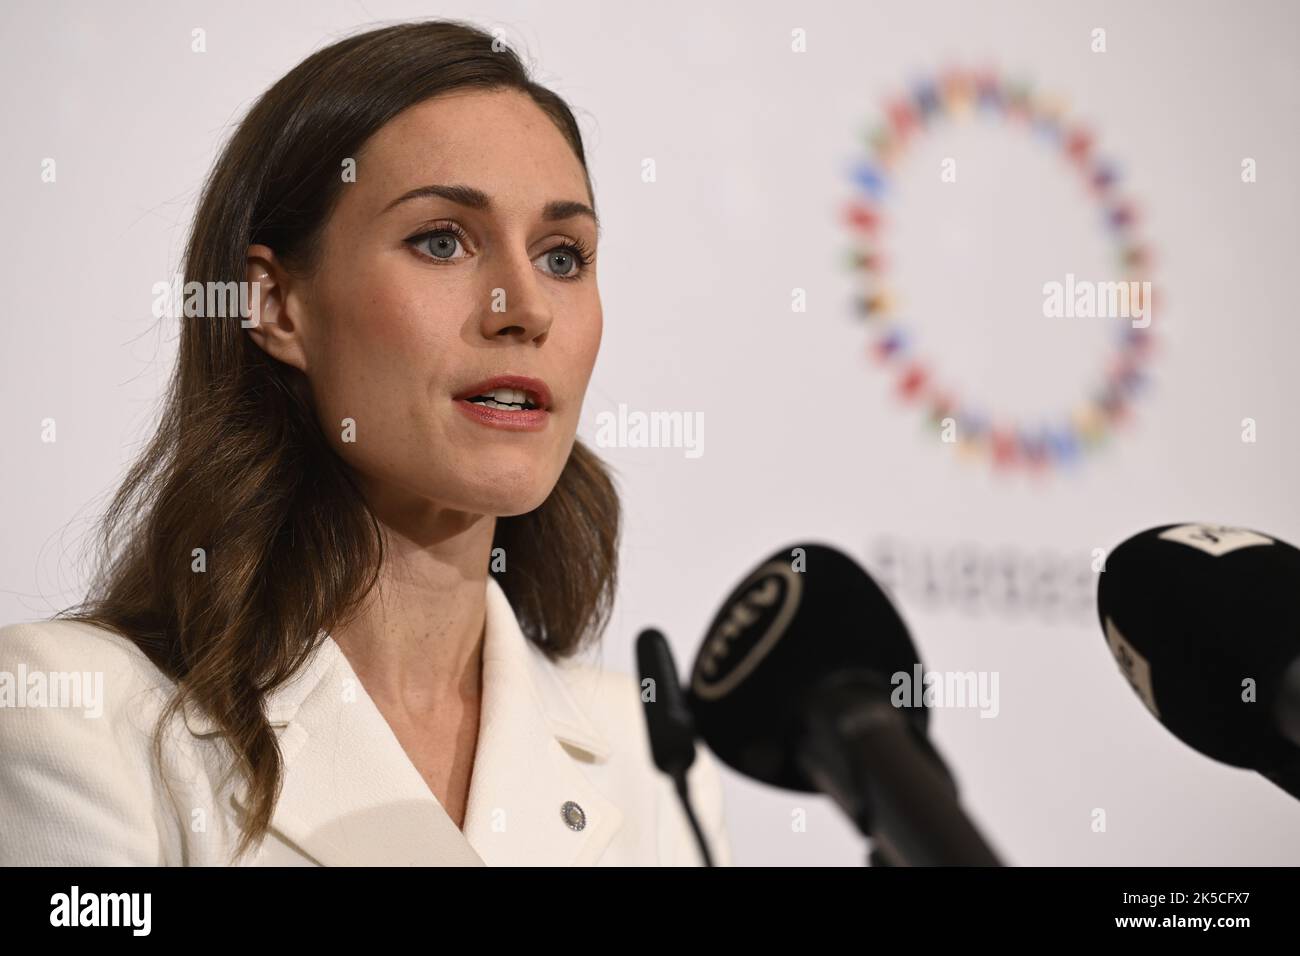 Prague, Czech Republic. 07th Oct, 2022. Finland's Prime Minister Sanna Marin speaks during the press conference at the end of the EU informal summit in the Prague Castle, Czech Republic, October 7, 2022. Credit: Ondrej Deml/CTK Photo/Alamy Live News Stock Photo